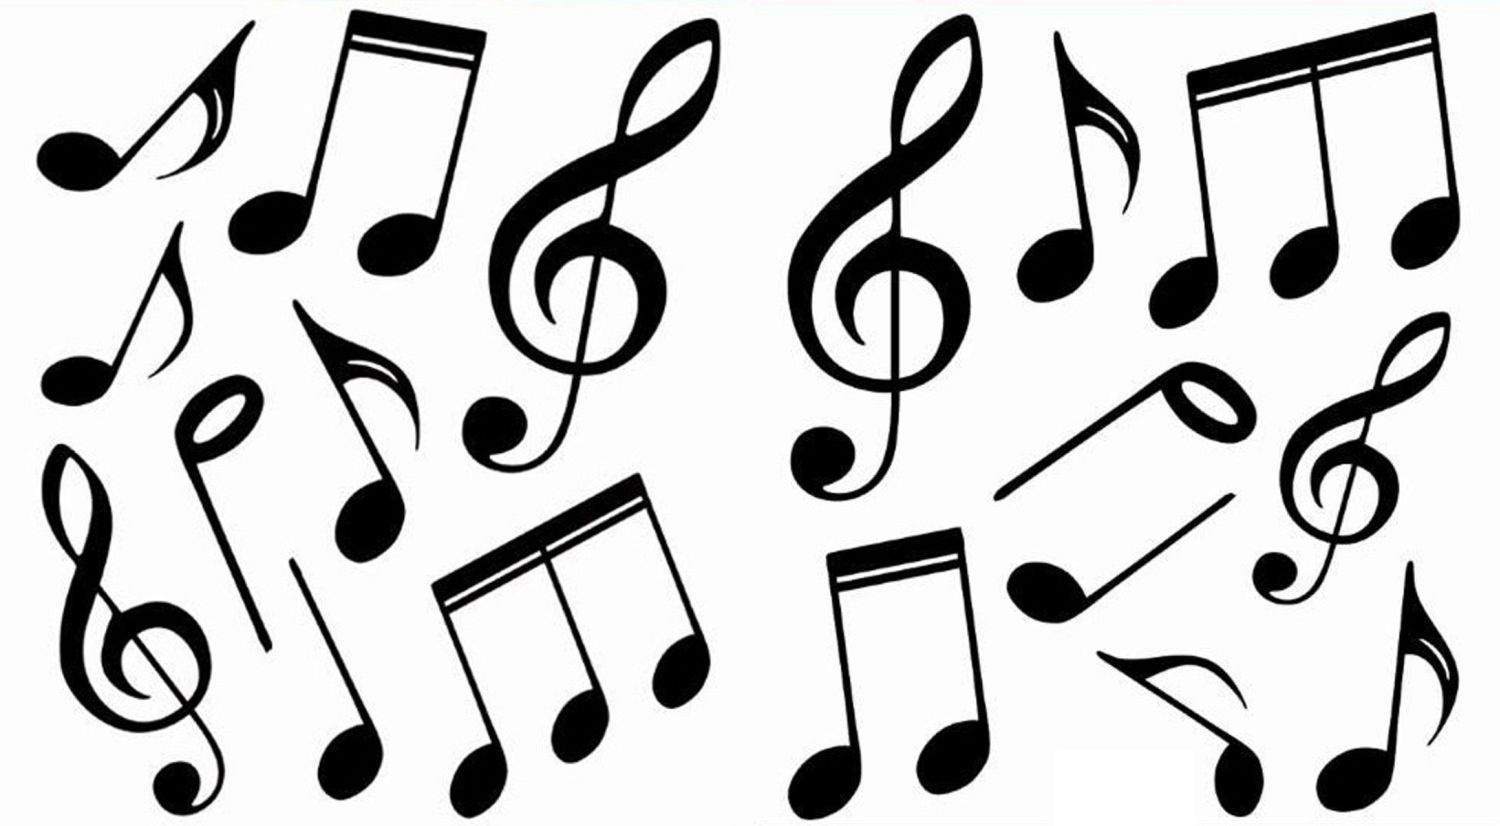 Free Pictures Of Music Notes And Symbols, Download Free Clip Art - Free Printable Pictures Of Music Notes